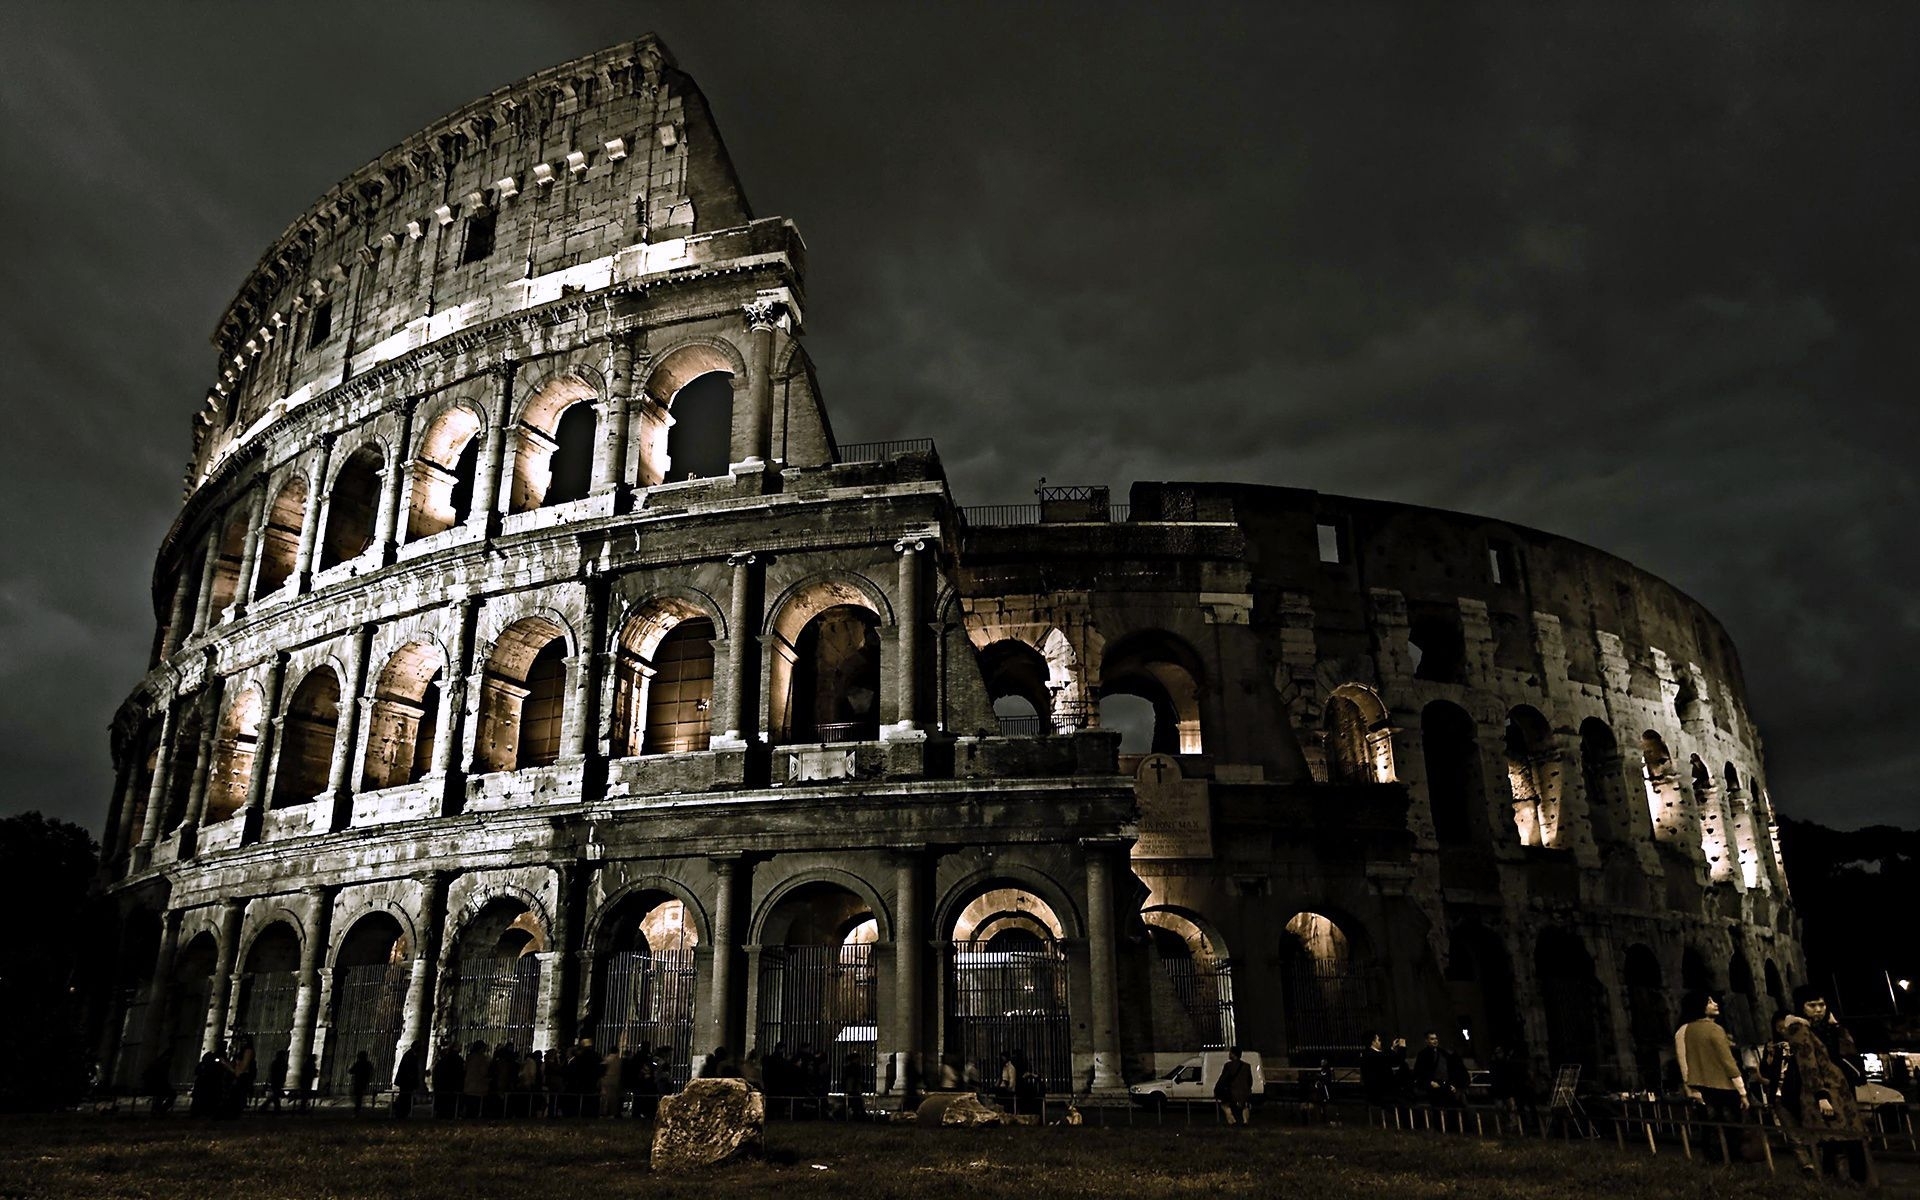 Popular Colosseum Image for Phone